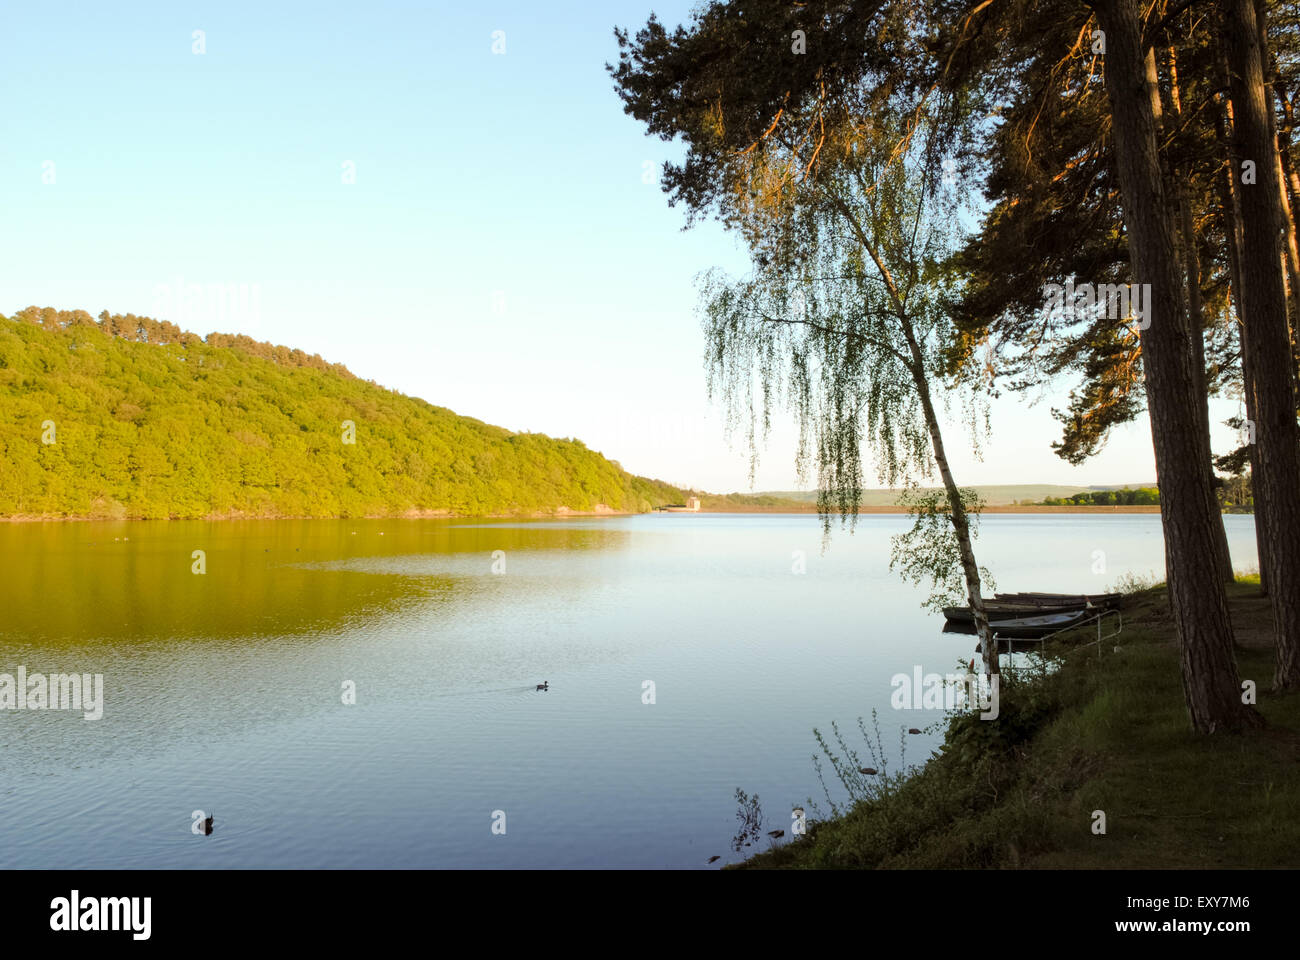 A Tranquil Scene of a Reservoir with Trees Stock Photo